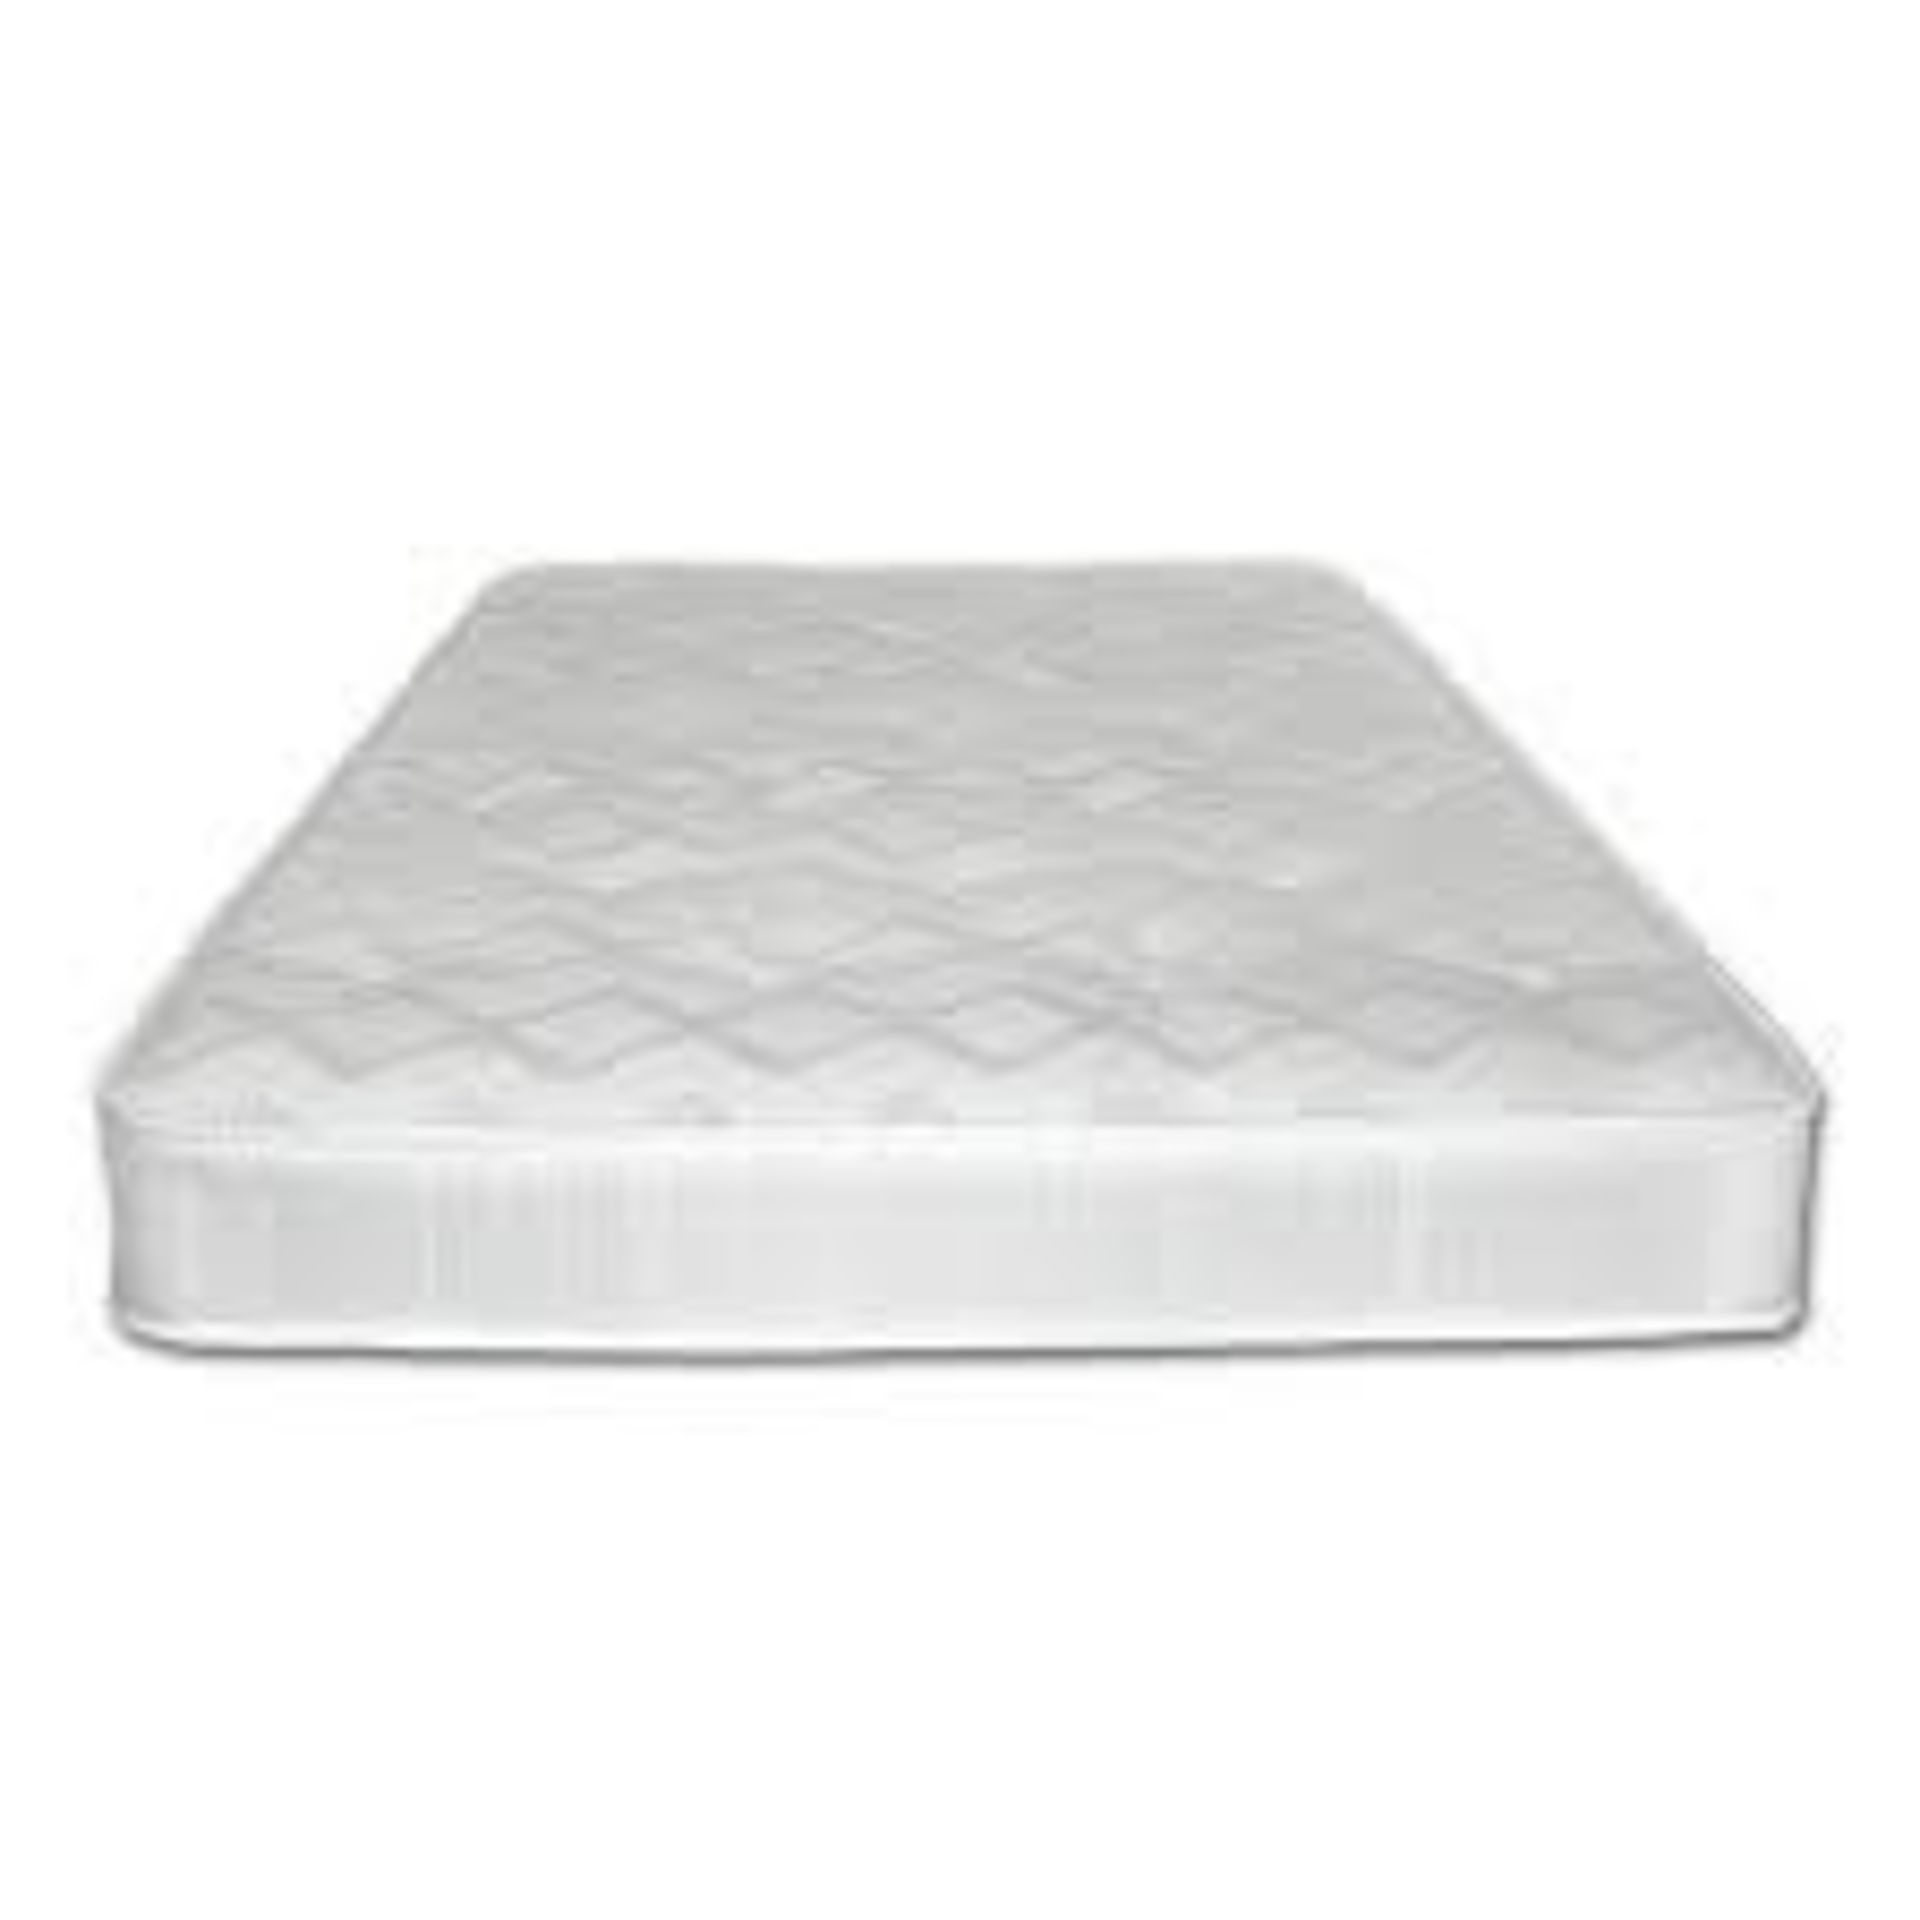 135 x 190cm Sprung Deluxe Rolled Mattress RRP £140 (15408) (Public Viewing and Appraisals